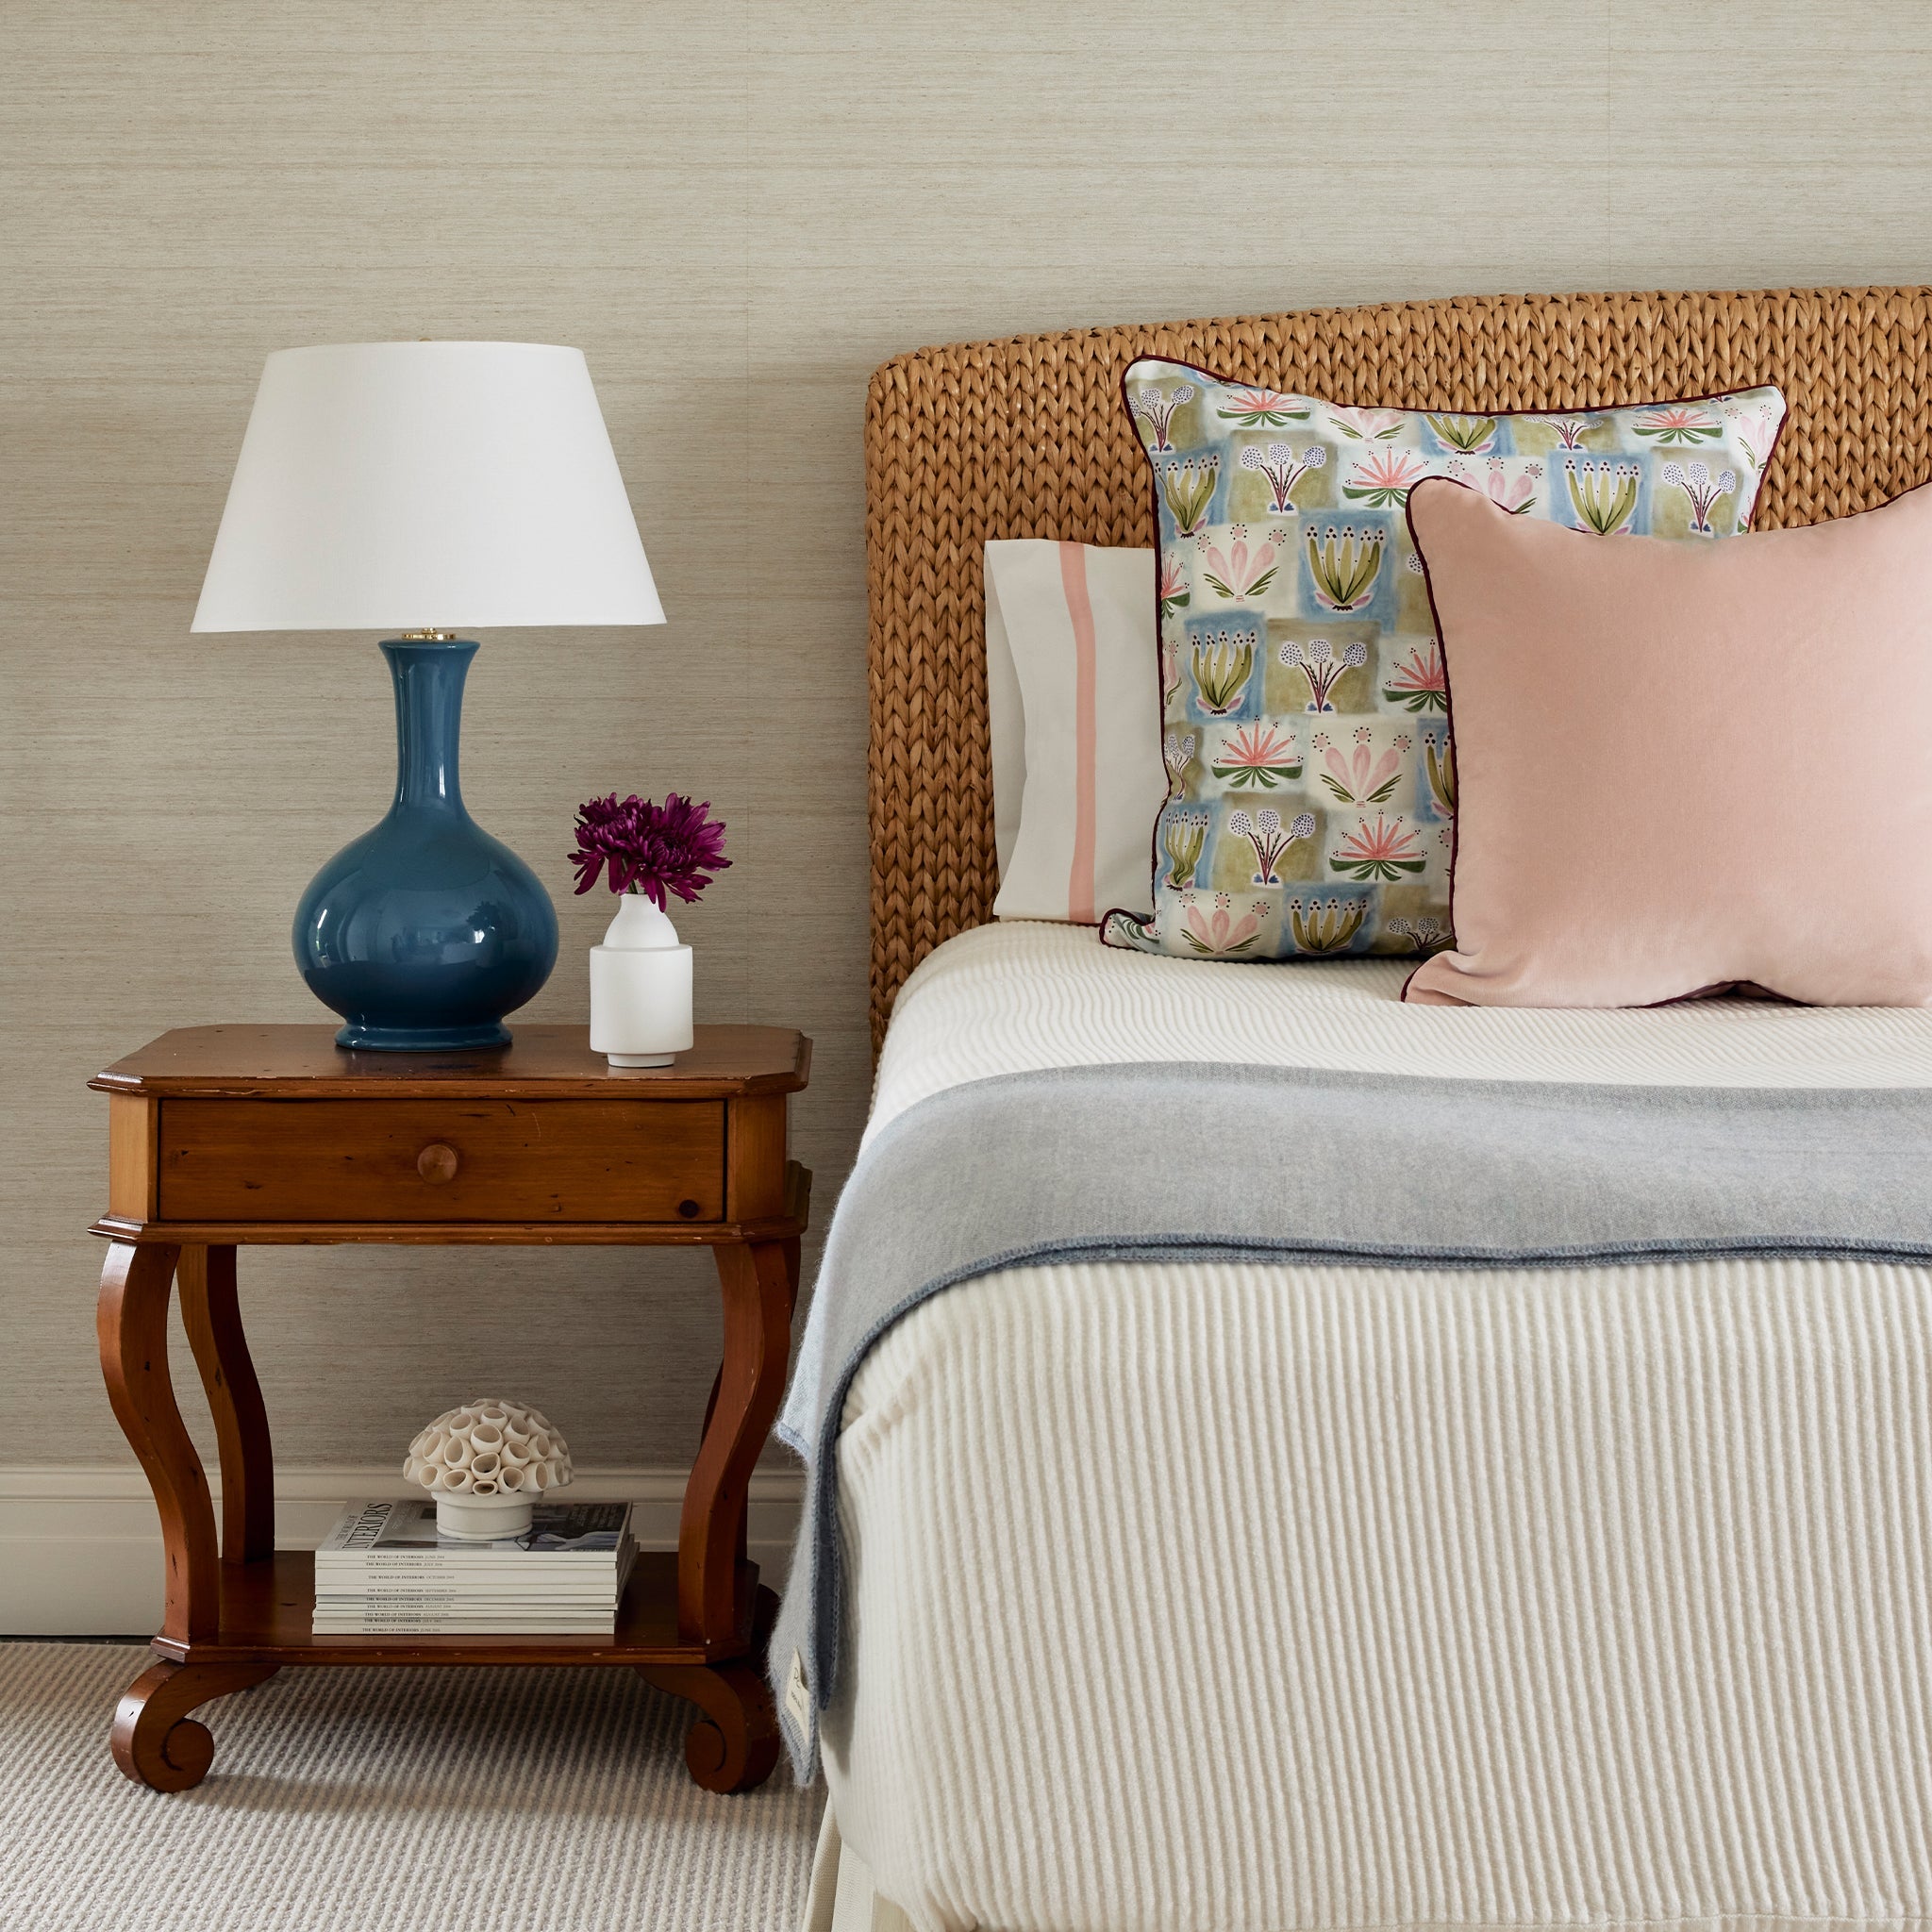 Bedroom corner styled with Hand-painted Floral Printed Pillow and Pink Velvet Pillow on white bed next to wooden nightstand with blue and white lamp on top by white vase with purple flowers